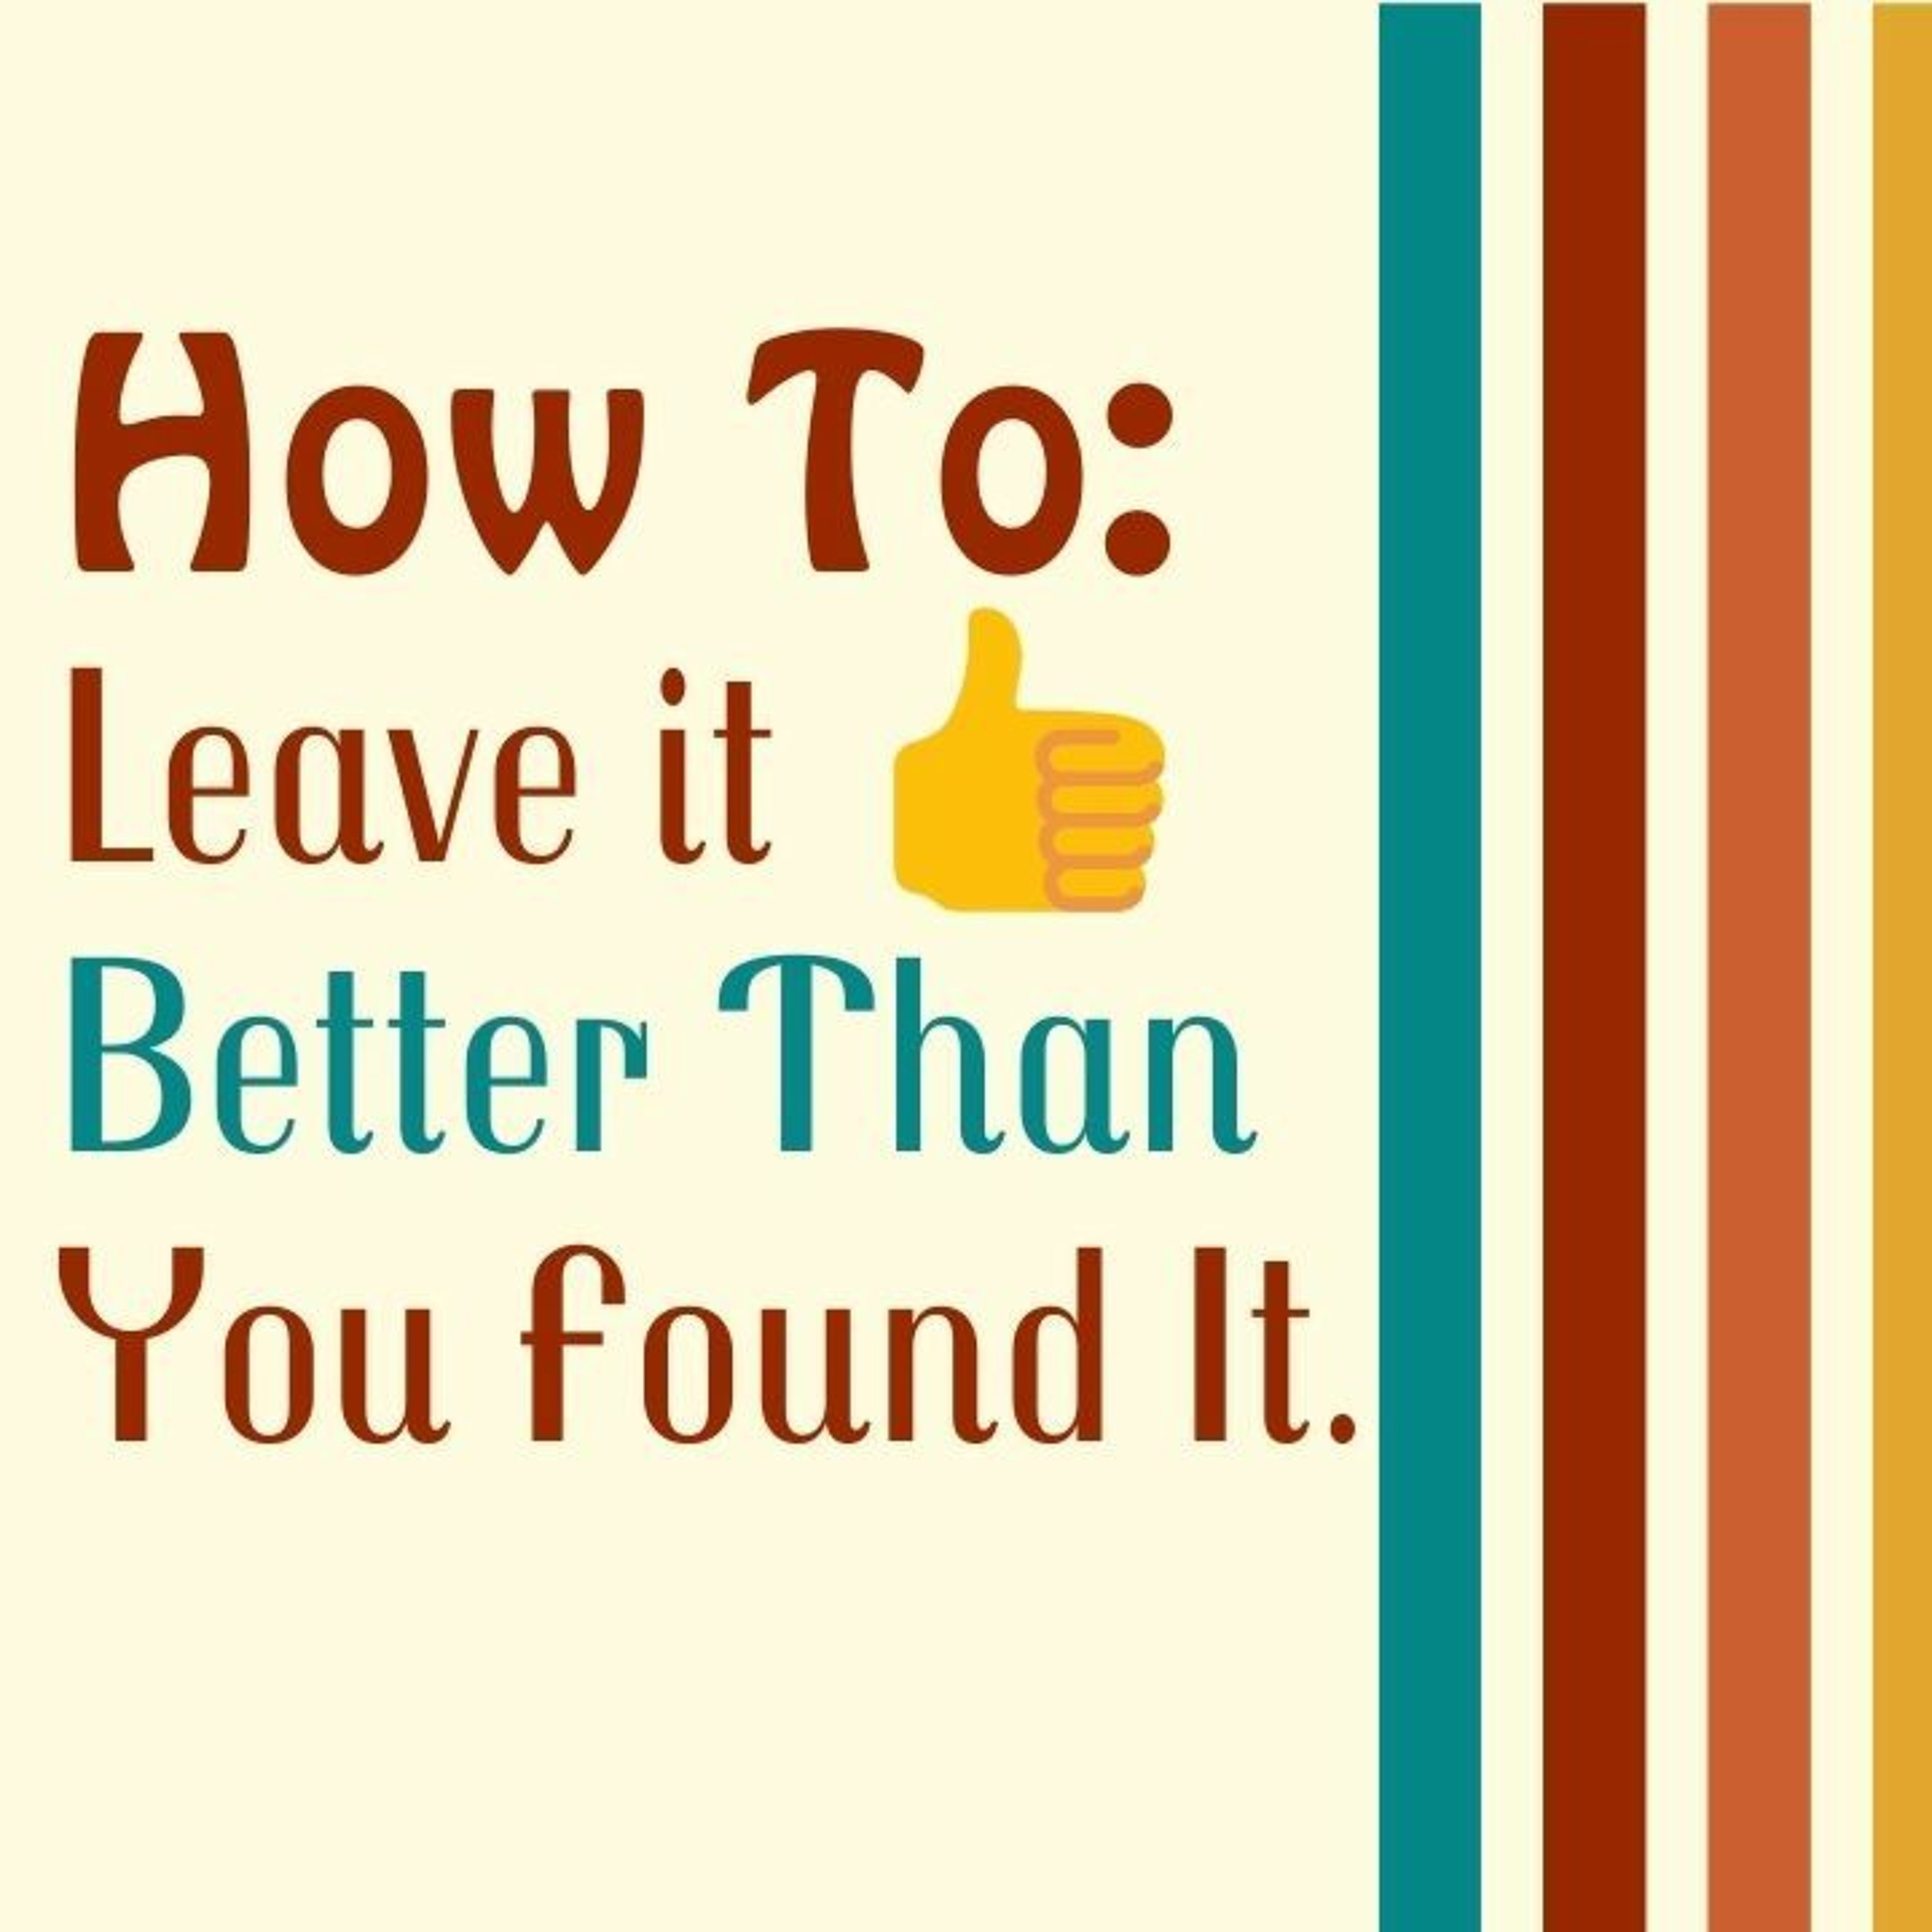 What The World Needs Now : How To Leave It Better Than You Found It Part 1